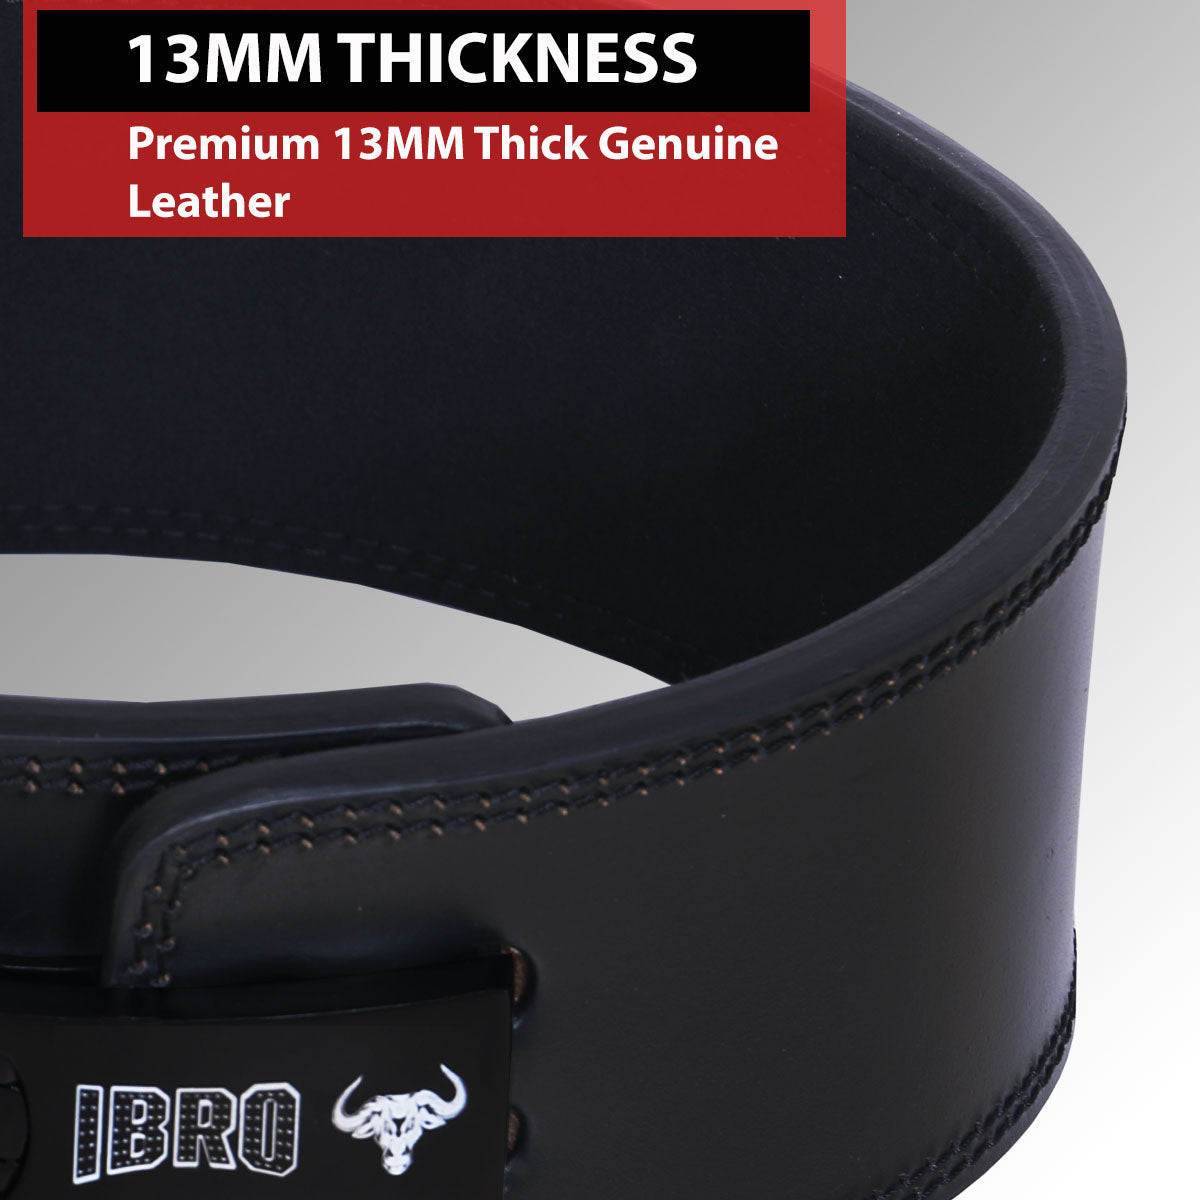 IBRO Powerlifting Weight Lifting Lever Gym Belt – 13MM Extreme Power Heavy Duty 100% Genuine Leather- Squat Deadlift Bodybuilding WeightLifting IPF Strongman for Men Women 13mm AllBlack